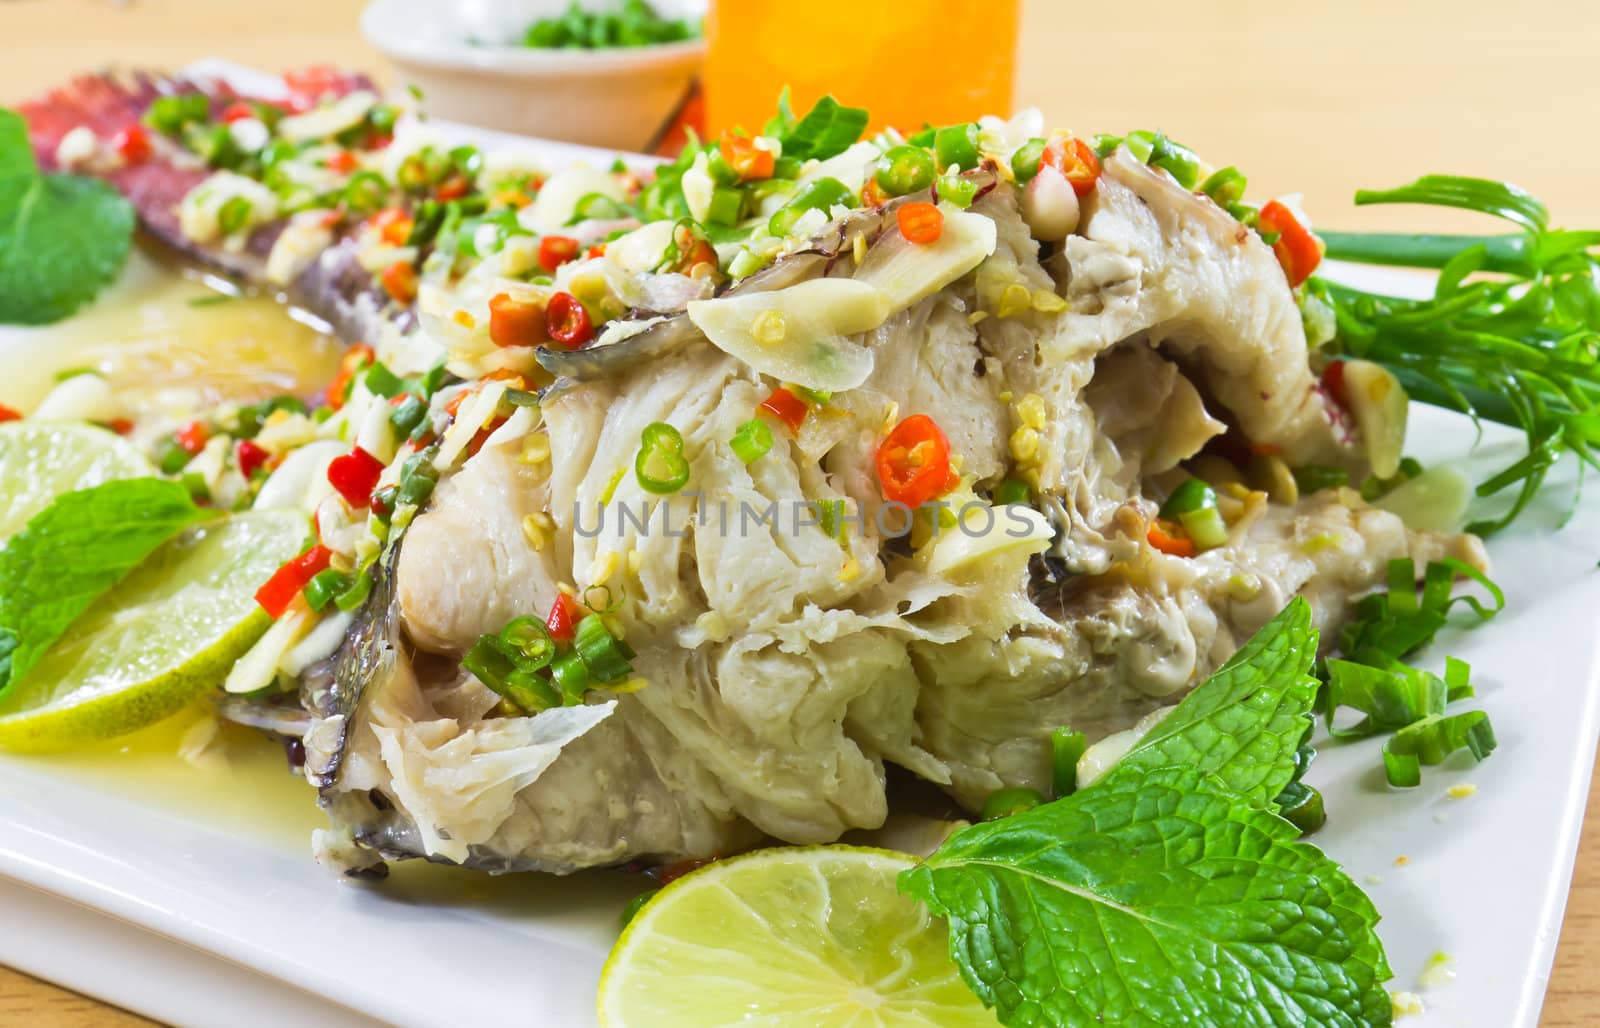 Spicy steamed fish by stoonn